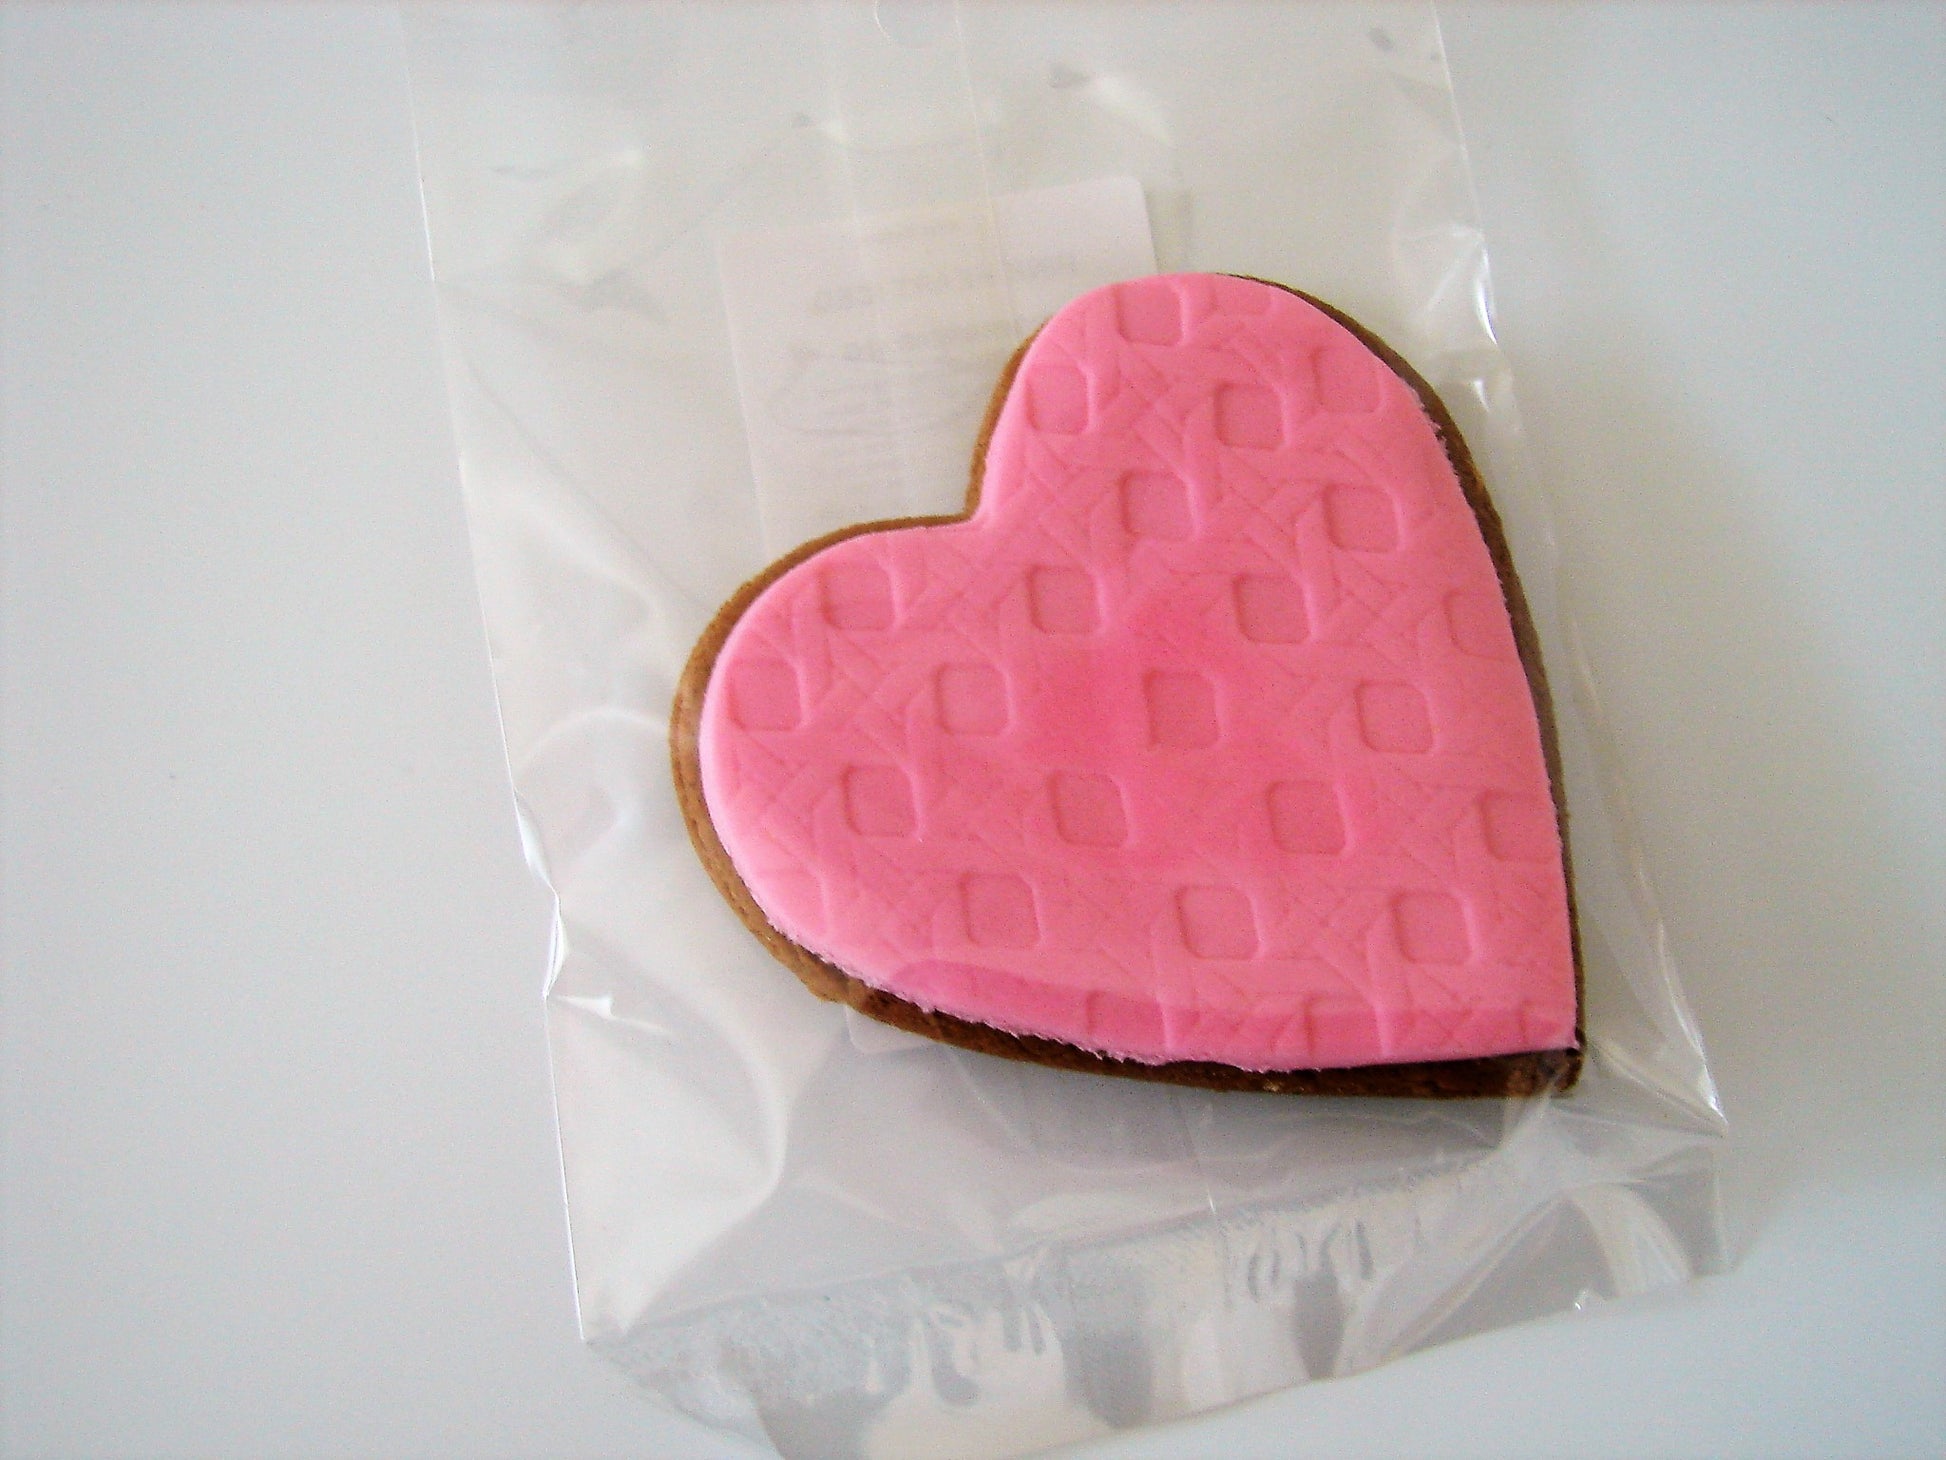 Molly Woppy Pink Iced Gingerbread Heart 48g